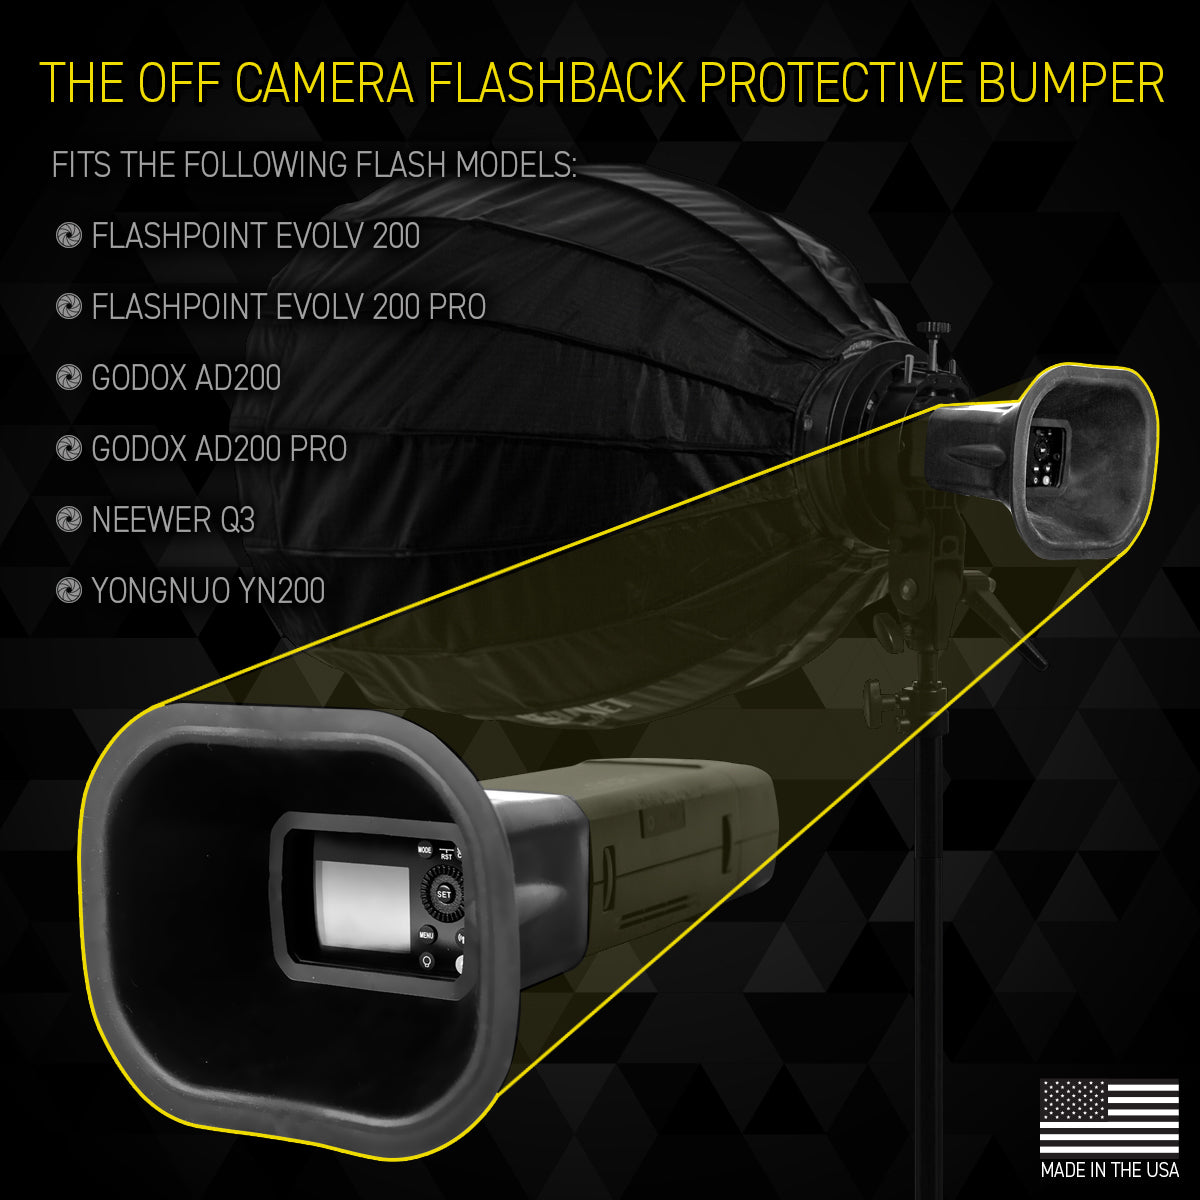 Flashback Protective Bumper for Off Camera Flash